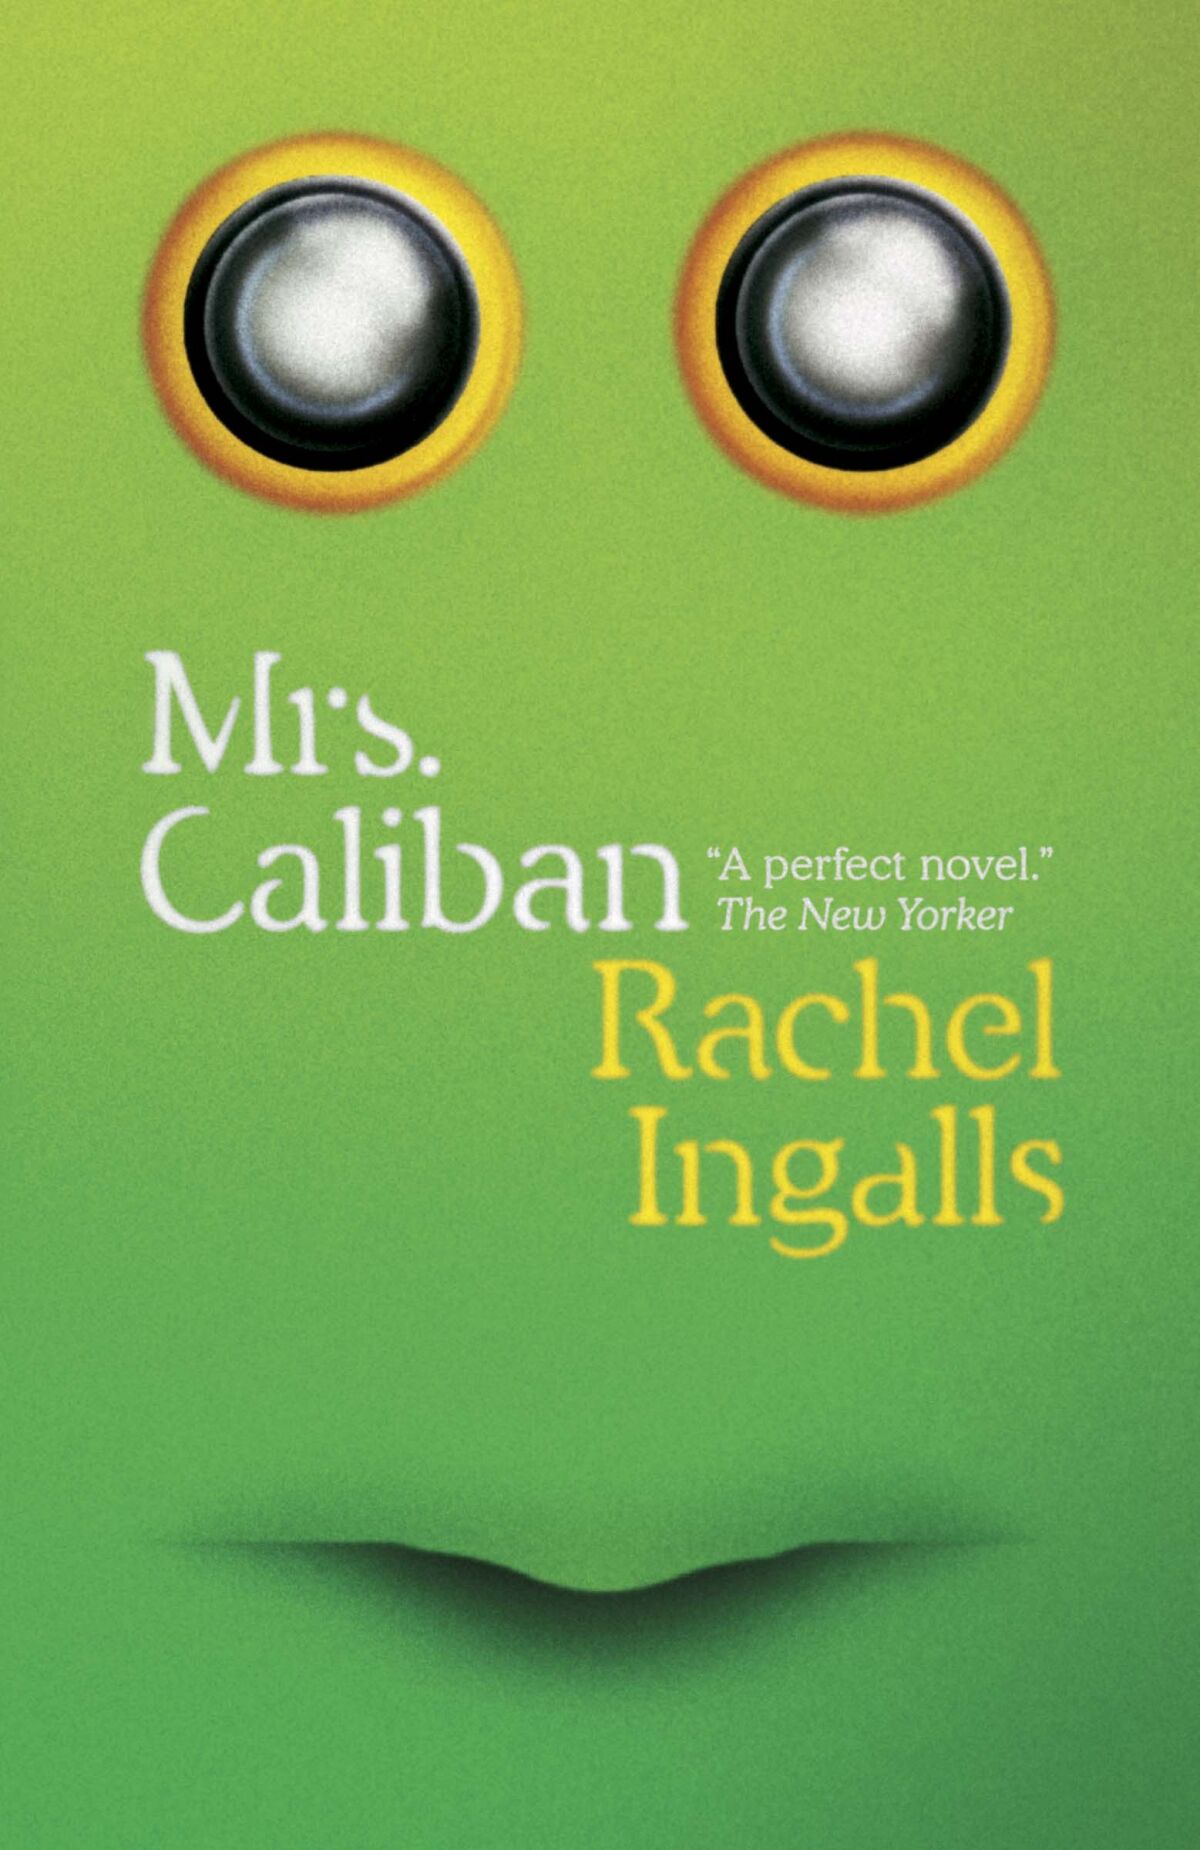 The cover of the book "Mrs. Caliban," by Rachel Ingalls, is green and looks a bit like a face with round eyes.